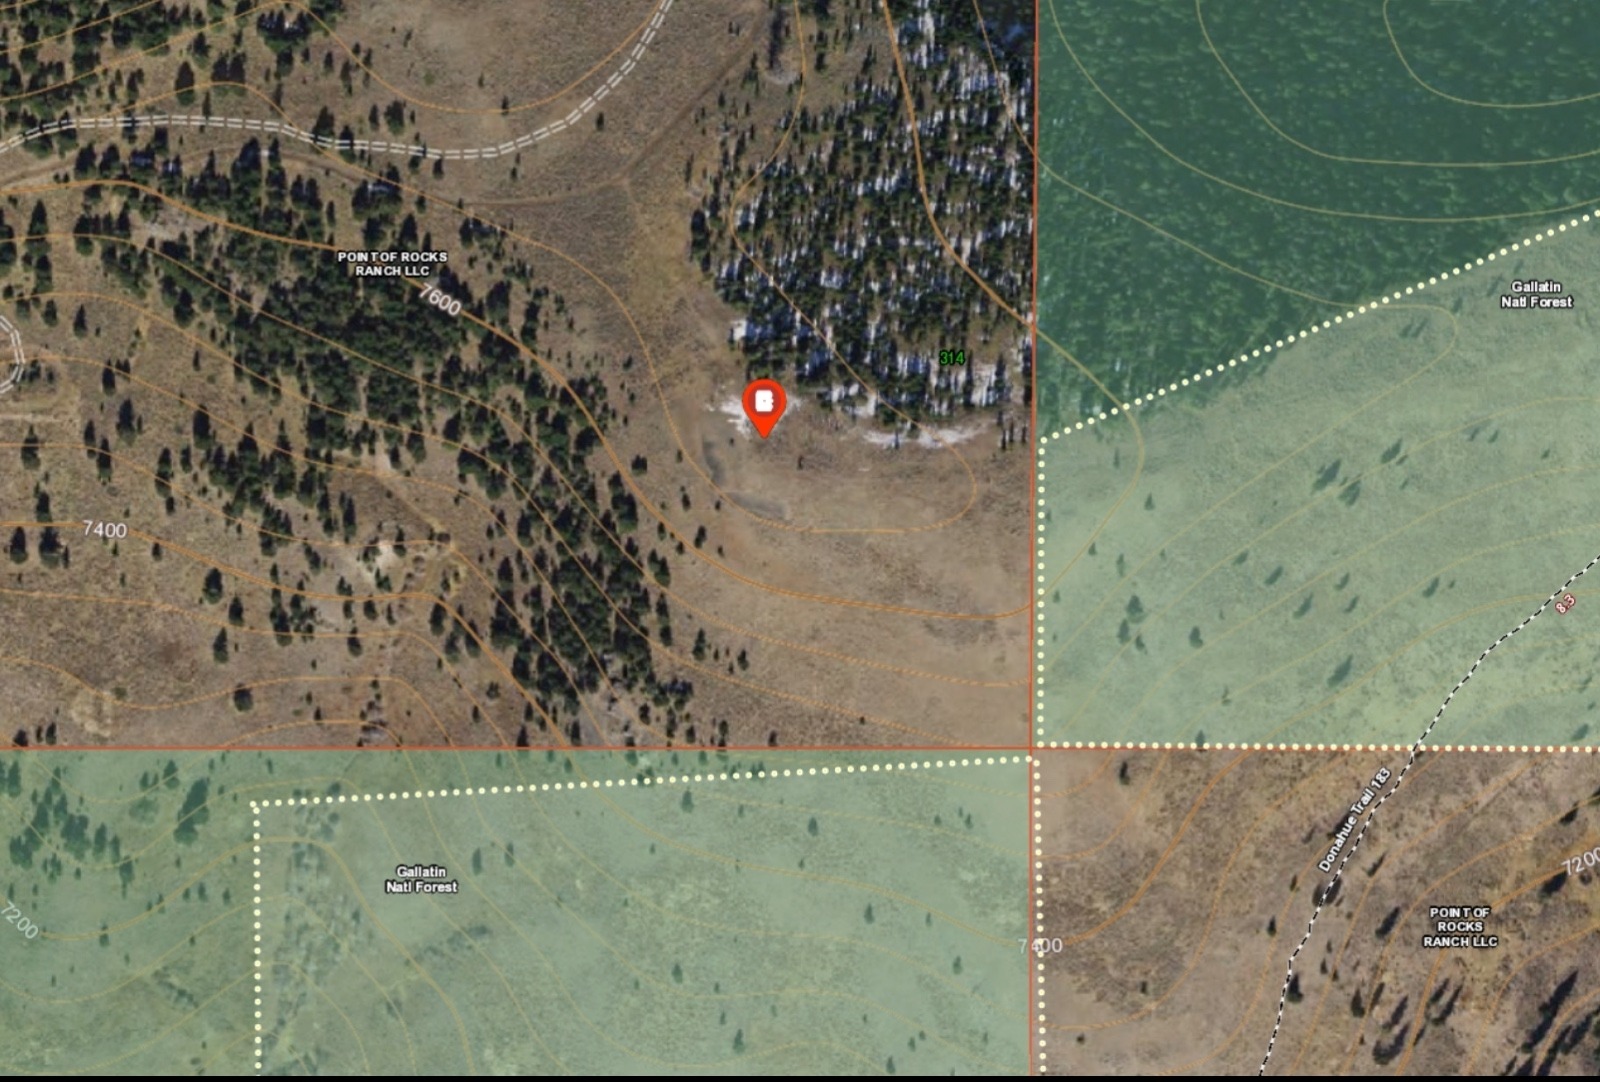 "The areas inside of the dotted lines (along a 2.8-milesection of strenuous uphill trail) are the only public land tracts that could even possibly provide that vantage point," Bongofsky says. "The red pin marks the end of a fourwheeler spur trail off of Point of Rocks Ranch. The Google Earth view lines up perfectly with the photo from Rosendale's Tweet. Note that the public trail is more than 300 feet of elevation lower. 